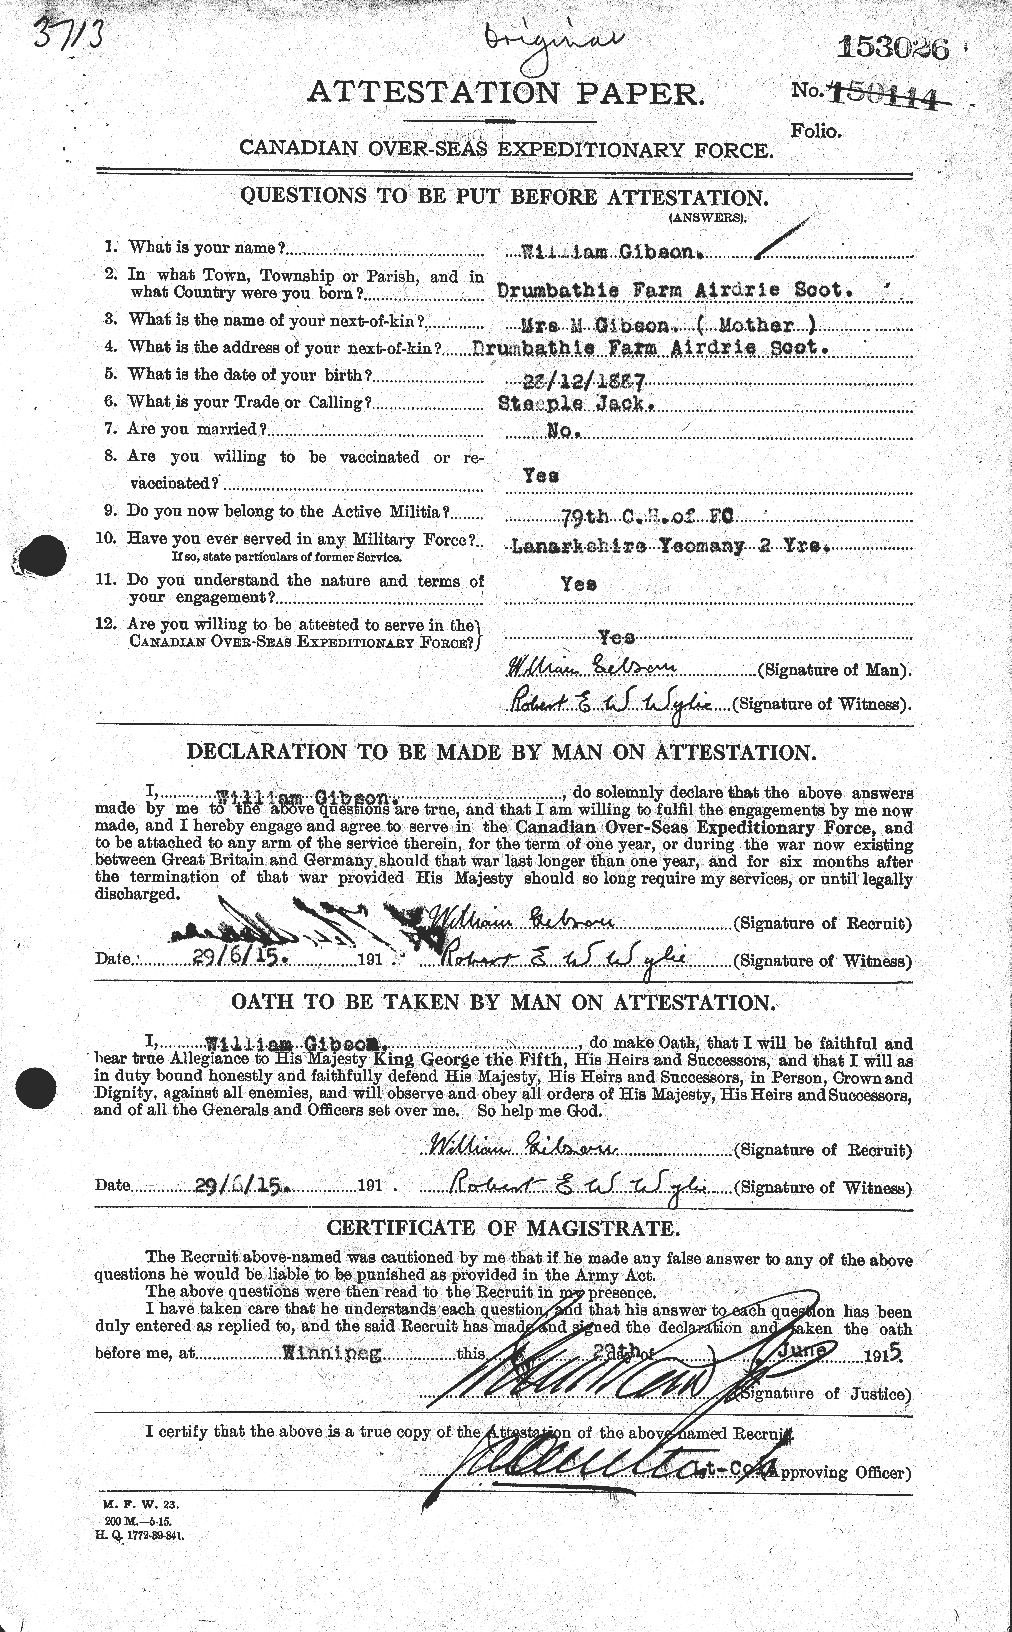 Personnel Records of the First World War - CEF 345900a